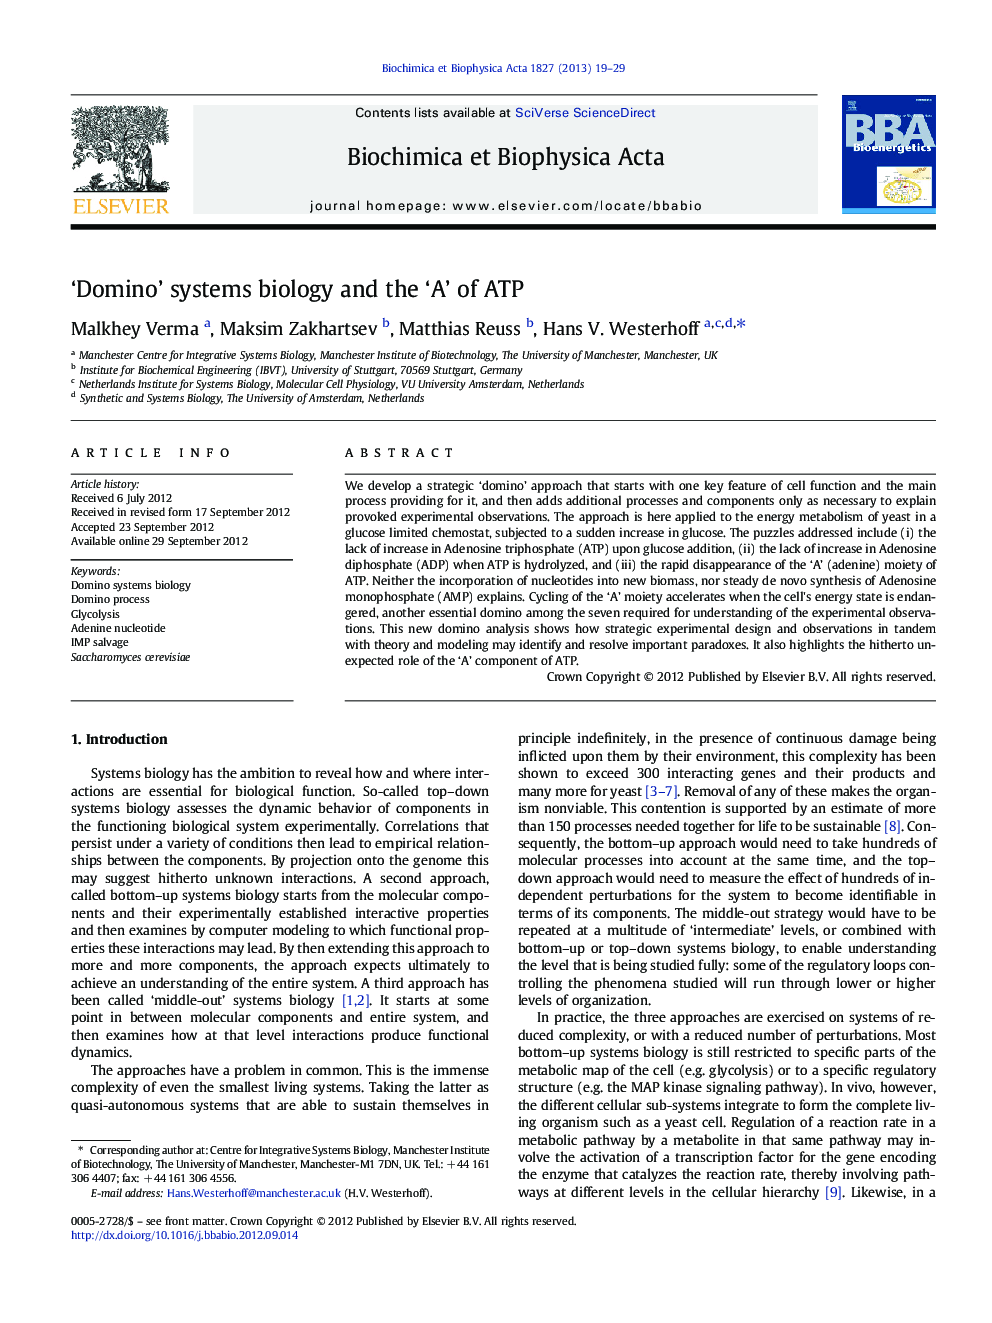 ‘Domino’ systems biology and the ‘A’ of ATP